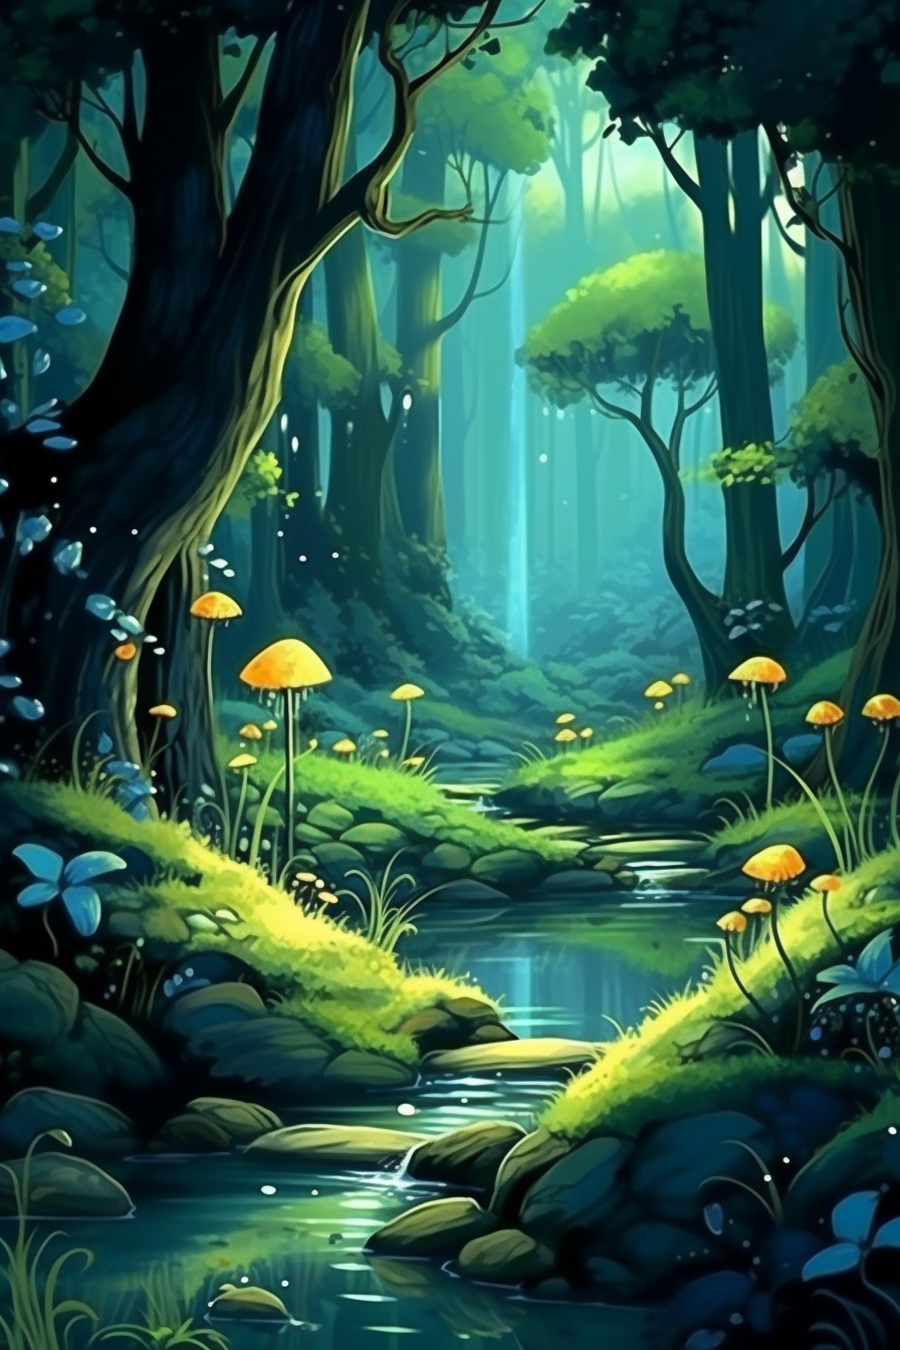 An illustration of a forest with a stream and mushrooms.